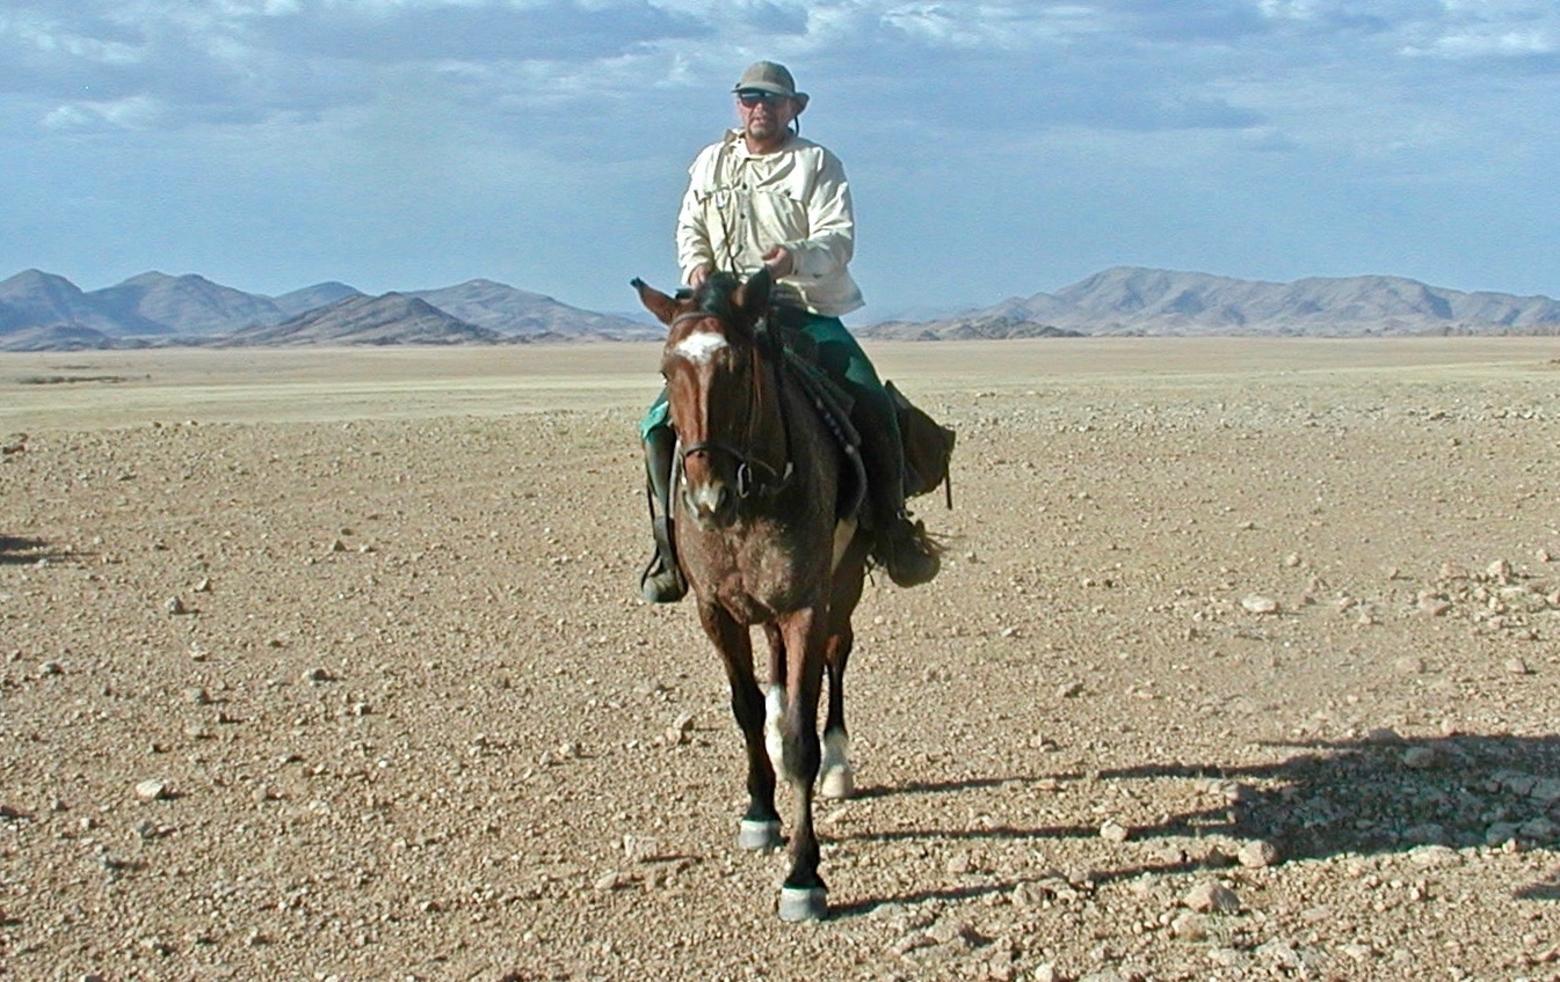 Steve Fuller on an 11-day 320km horse trip across the Namib desert from near the central plateau city of Windhoek to the town of Swakopmund on the South Atlantic Coast. &nbsp;He was engaged by the Namibian outfitter to photograph the trip.